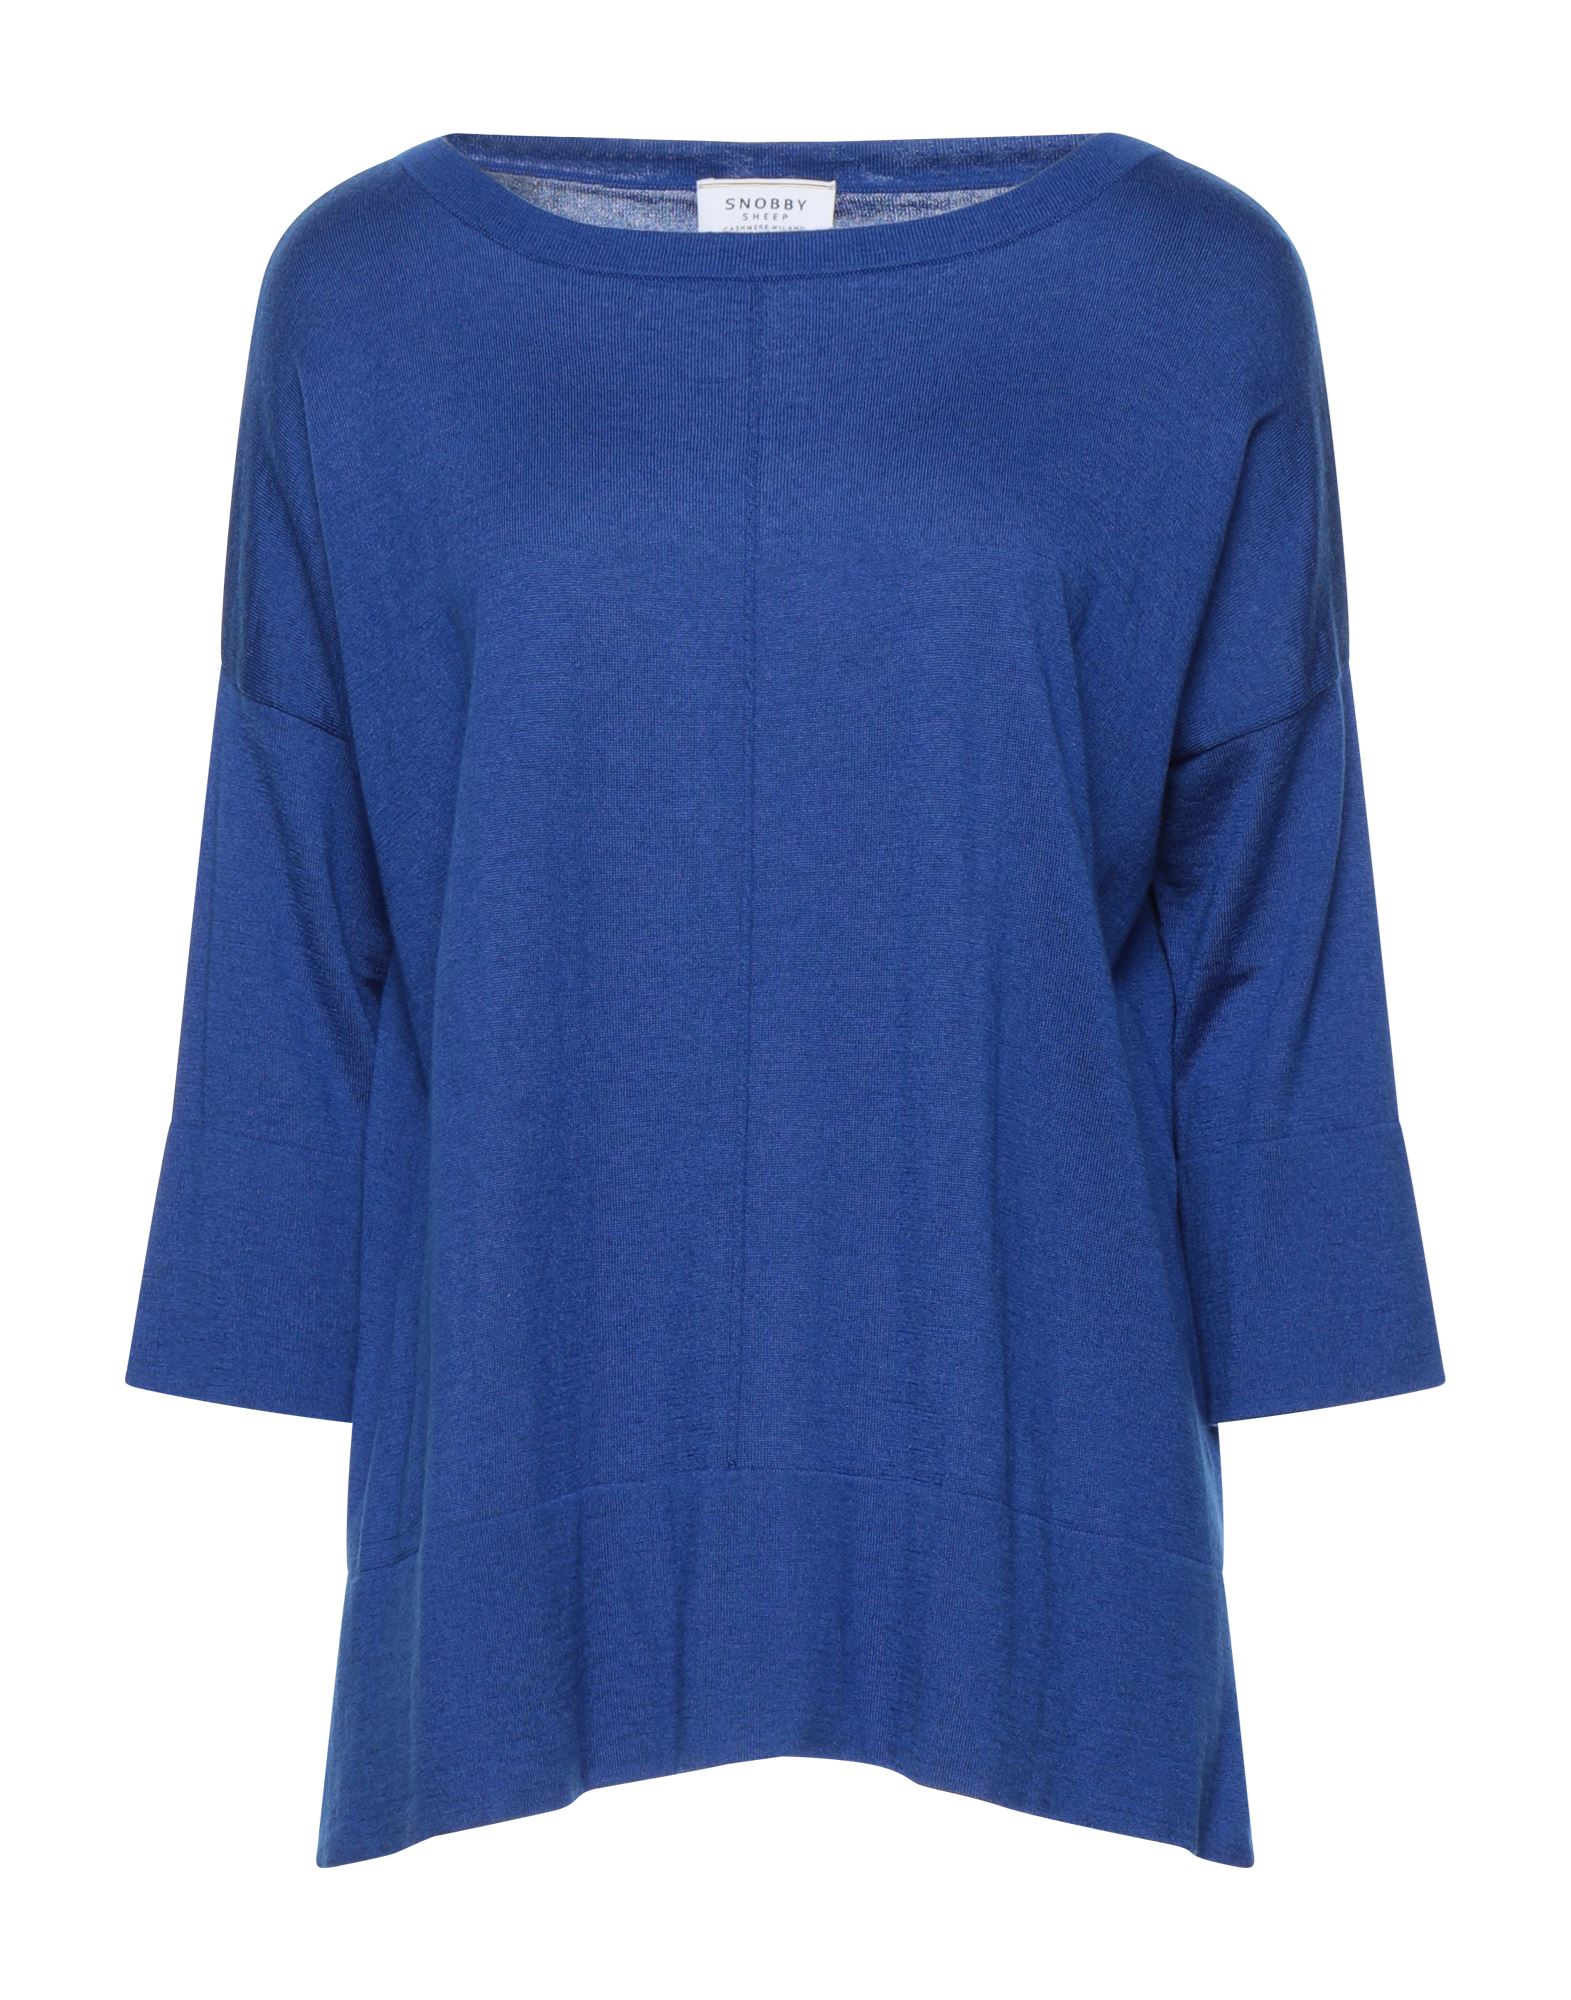 Snobby Sheep Sweaters In Blue